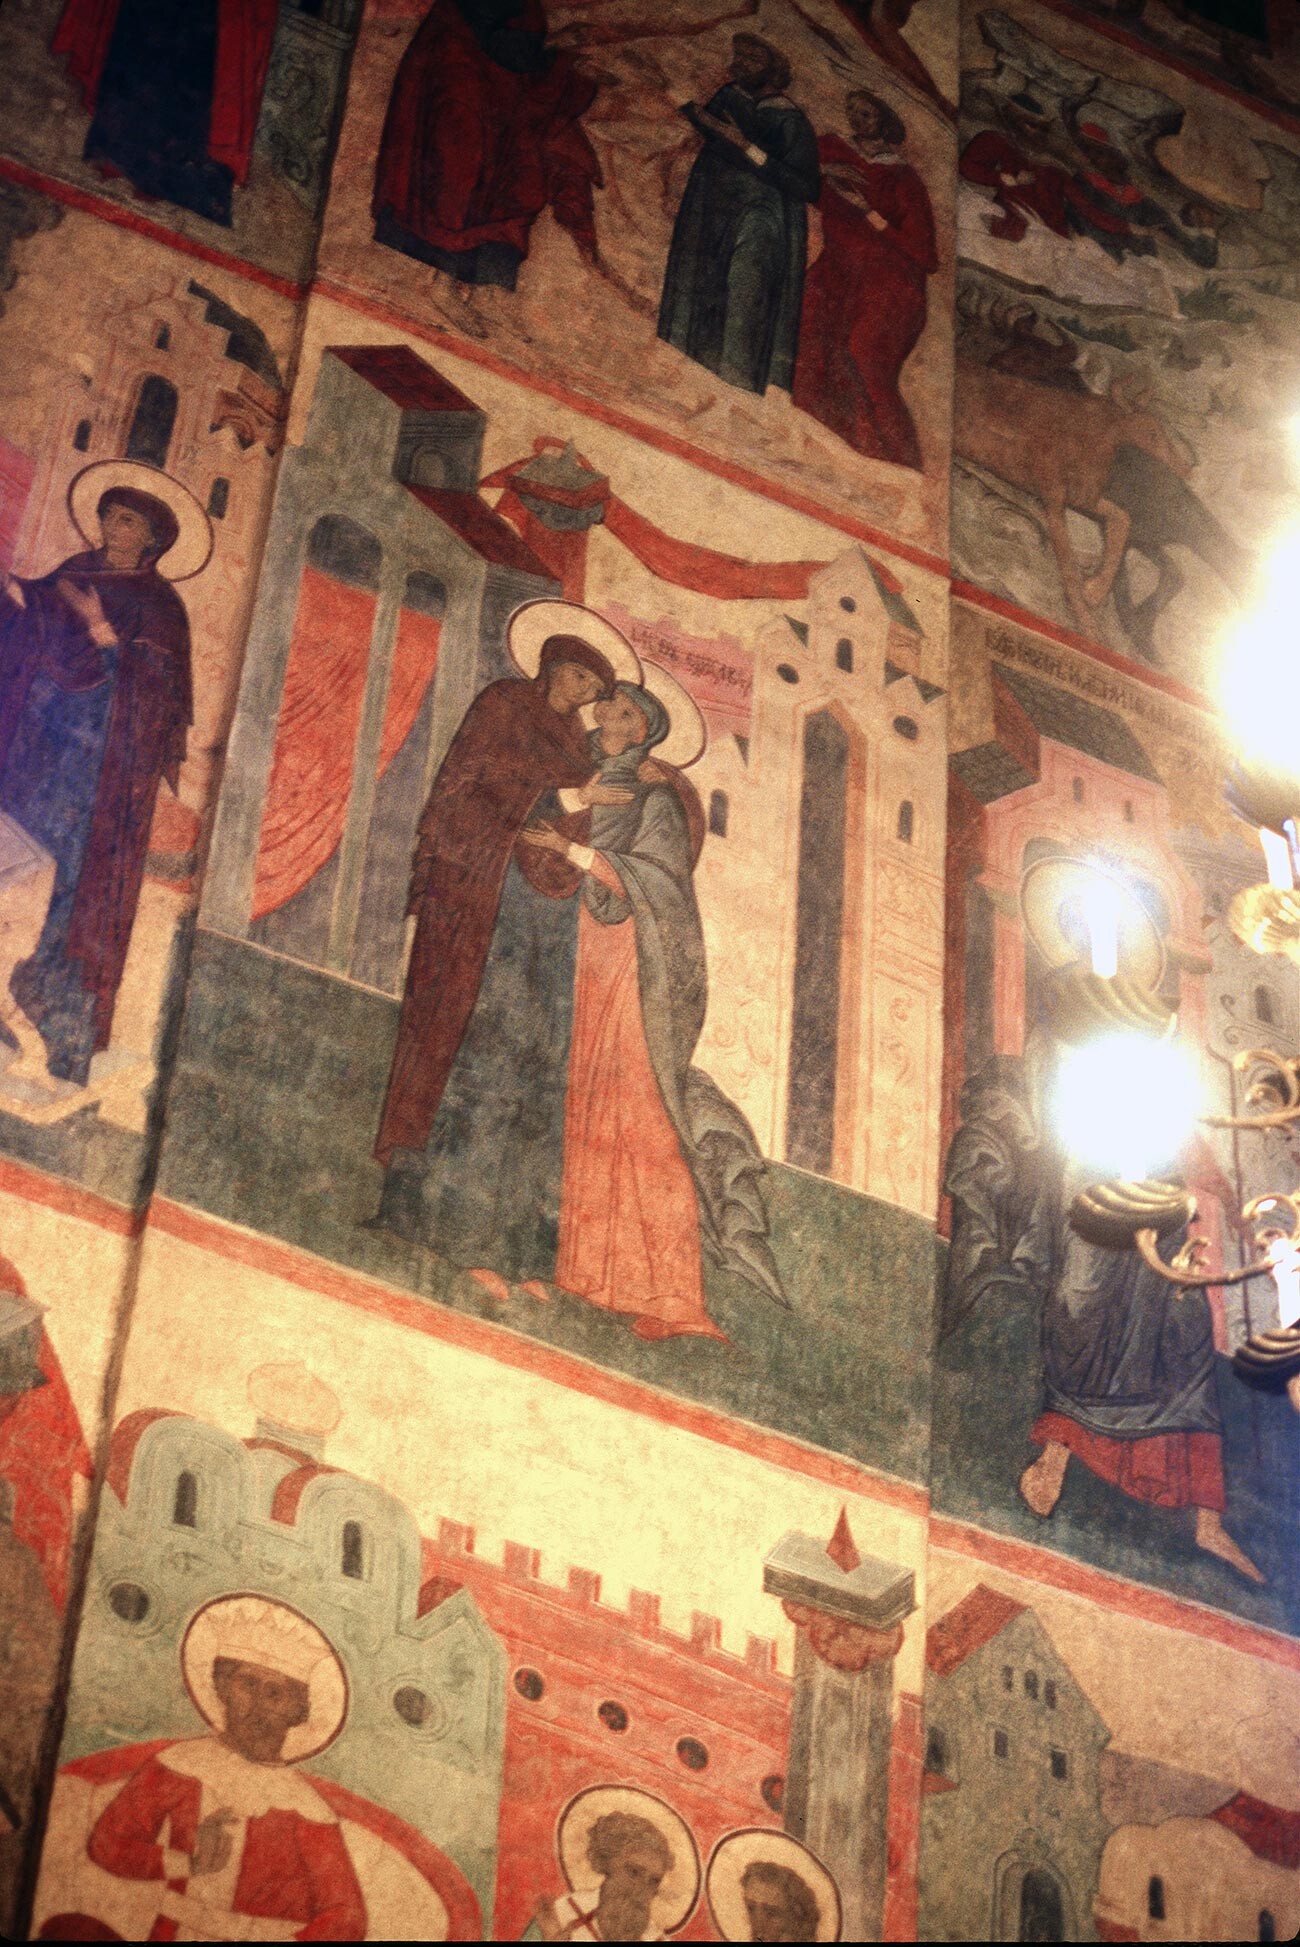 Dormition Cathedral, interior. South wall with fresco of the Visitation (Virgin Mary & St. Elizabeth, mother of John the Baptist). July 11, 1999